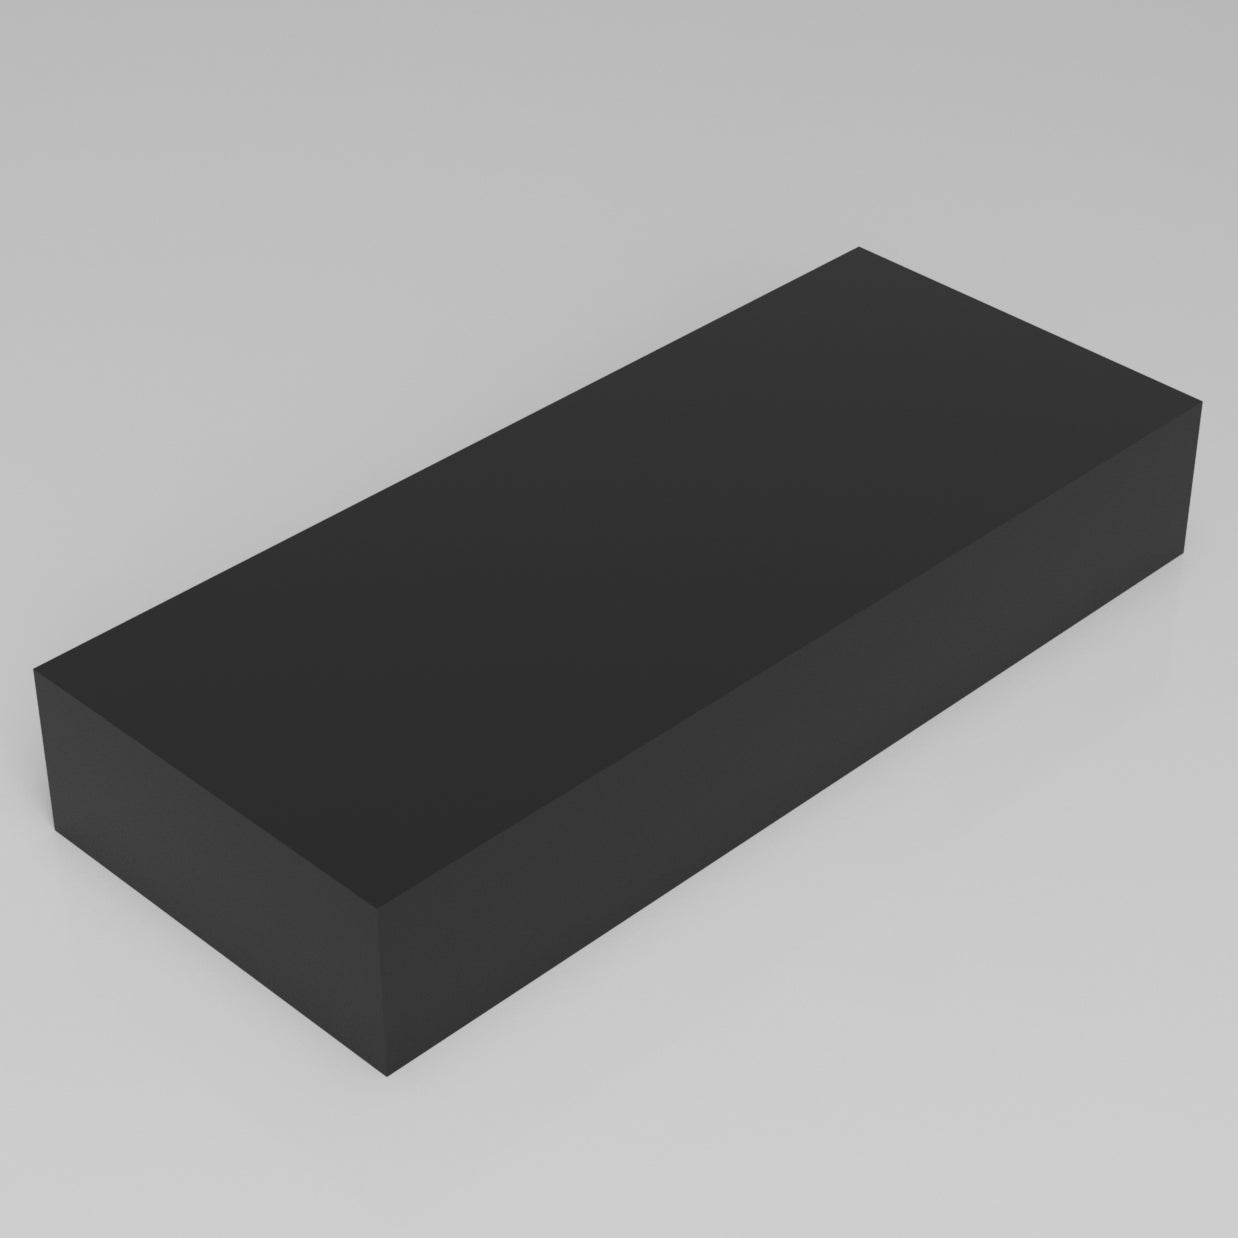 Machinable Wax Rectangular Block Front View 4 Inch by 10 Inch by 24 Inch